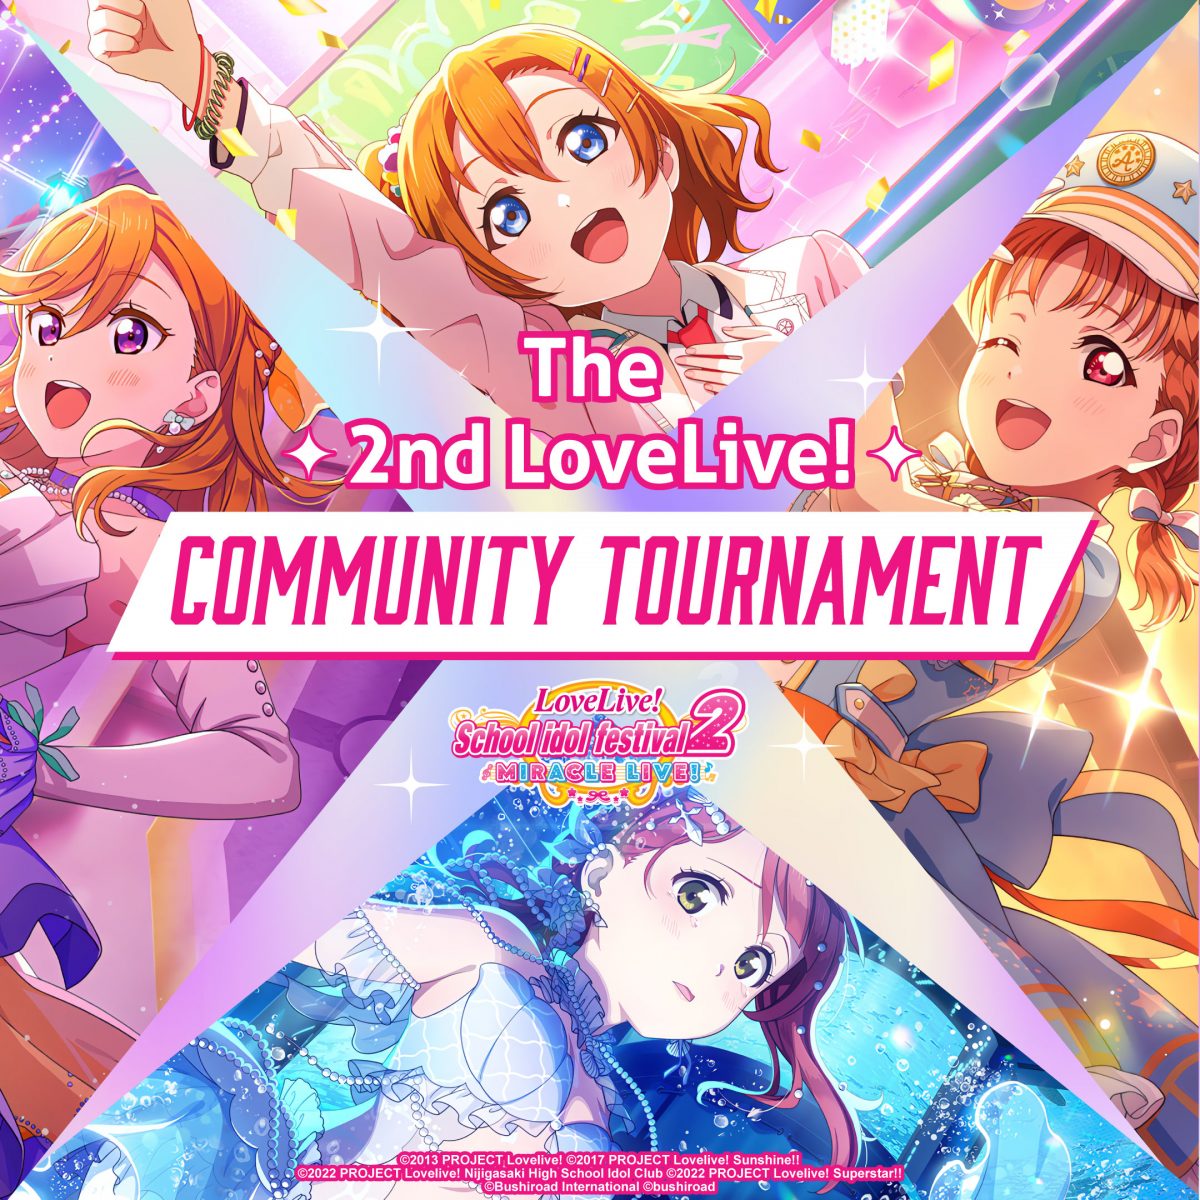 Winners for the 2nd Love Live! Community Tournament 🎶✨